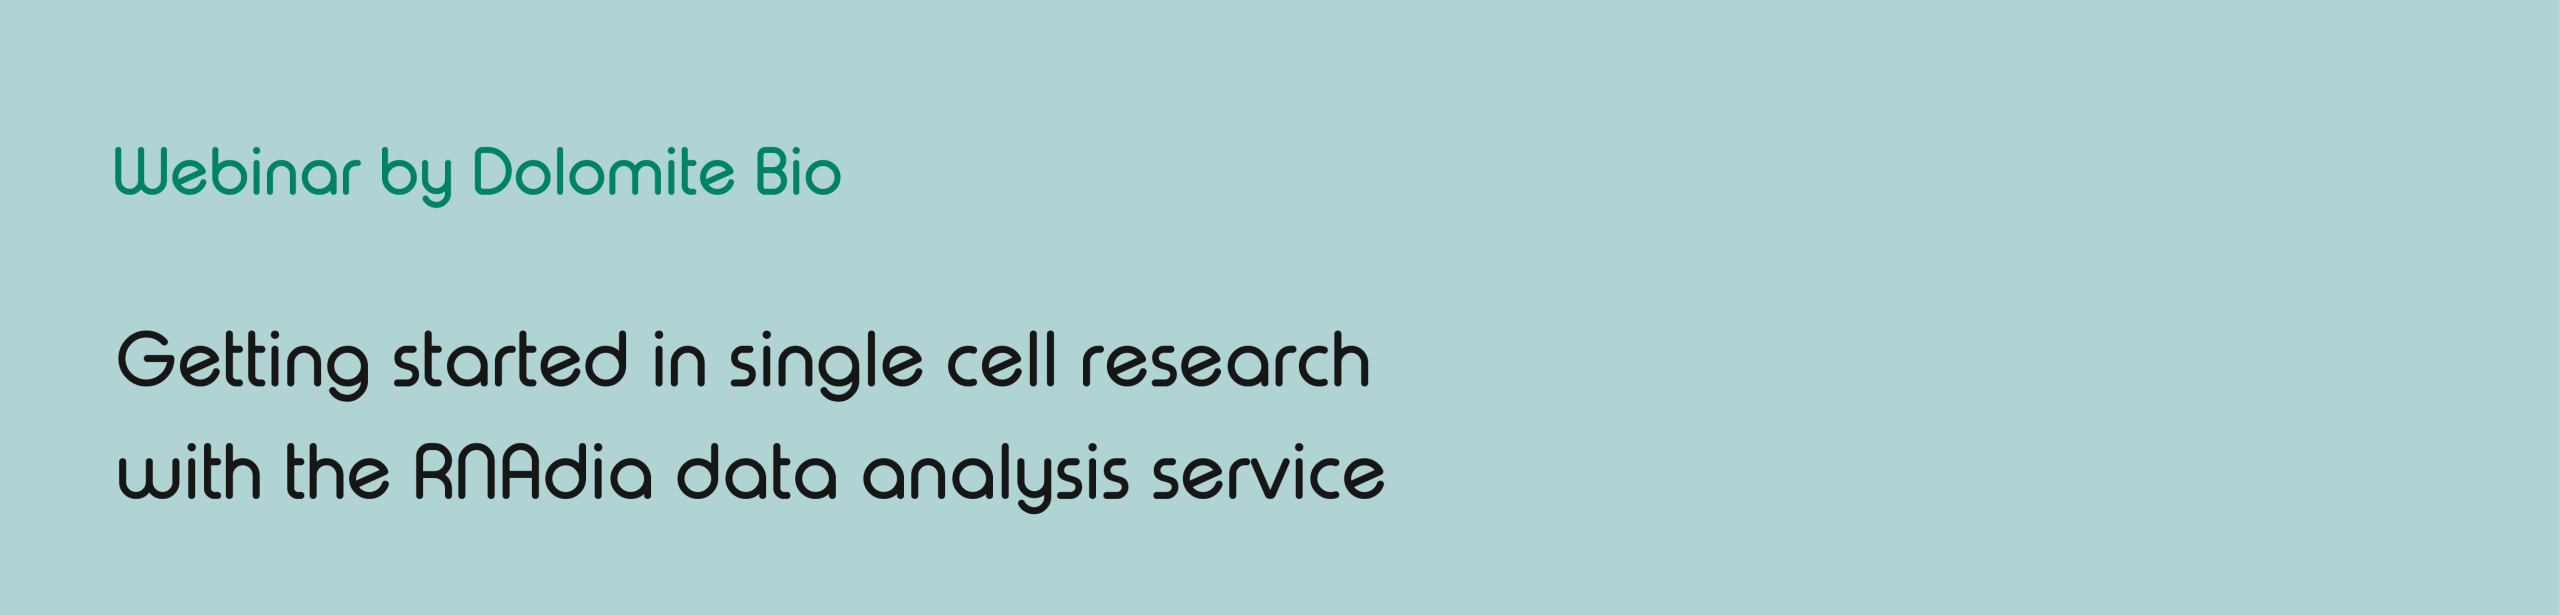 Getting started in single cell research with the RNAdia data analysis service